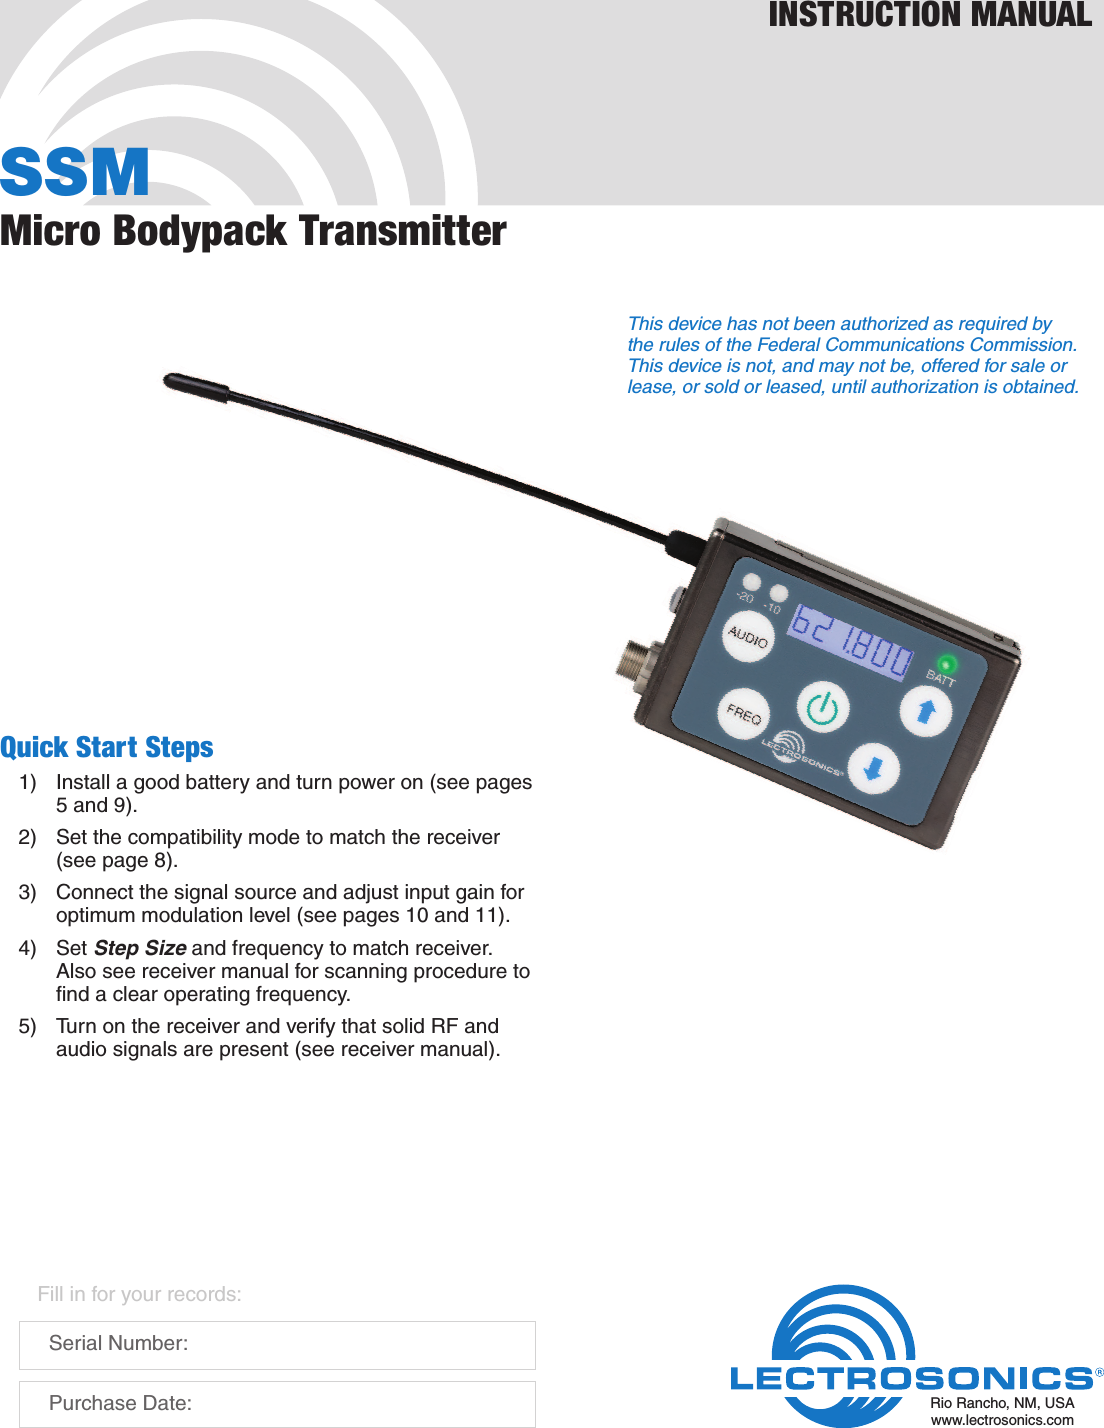 SSMMicro Bodypack TransmitterINSTRUCTION MANUALRio Rancho, NM, USAwww.lectrosonics.comFill in for your records:  Serial Number:  Purchase Date:Quick Start Steps1)  Install a good battery and turn power on (see pages 5 and 9).2)  Set the compatibility mode to match the receiver (see page 8).3)  Connect the signal source and adjust input gain for optimum modulation level (see pages 10 and 11).4) Set Step Size and frequency to match receiver. Also see receiver manual for scanning procedure to ﬁnd a clear operating frequency.5)  Turn on the receiver and verify that solid RF and audio signals are present (see receiver manual).This device has not been authorized as required by the rules of the Federal Communications Commission. This device is not, and may not be, offered for sale or lease, or sold or leased, until authorization is obtained.